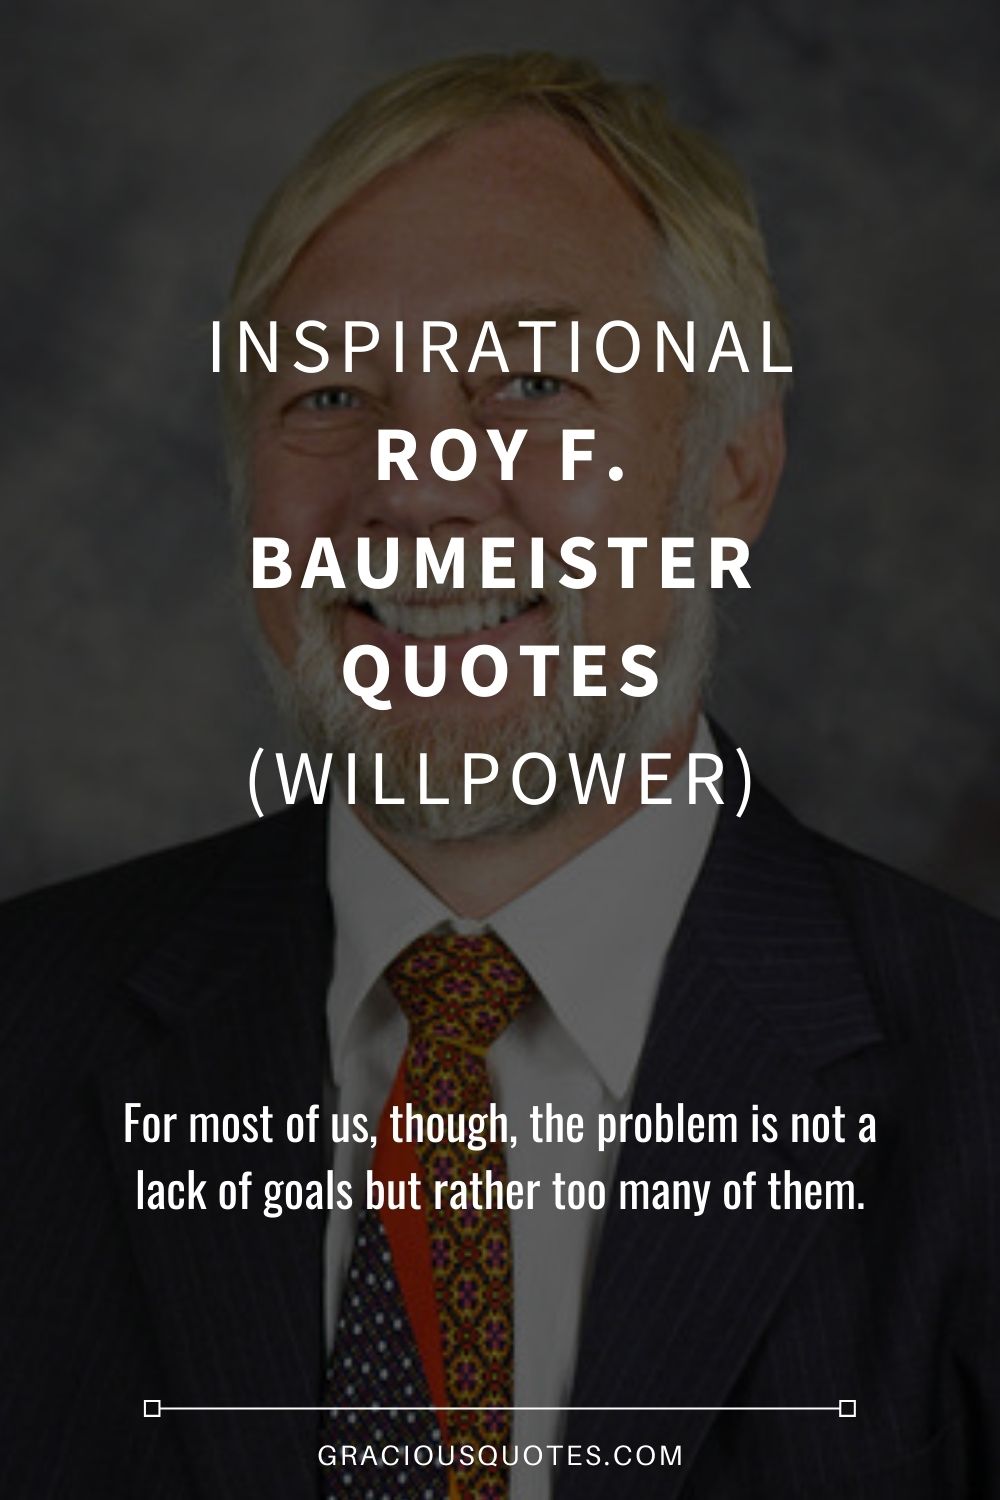 Inspirational Roy F. Baumeister Quotes (WILLPOWER) - Gracious Quotes